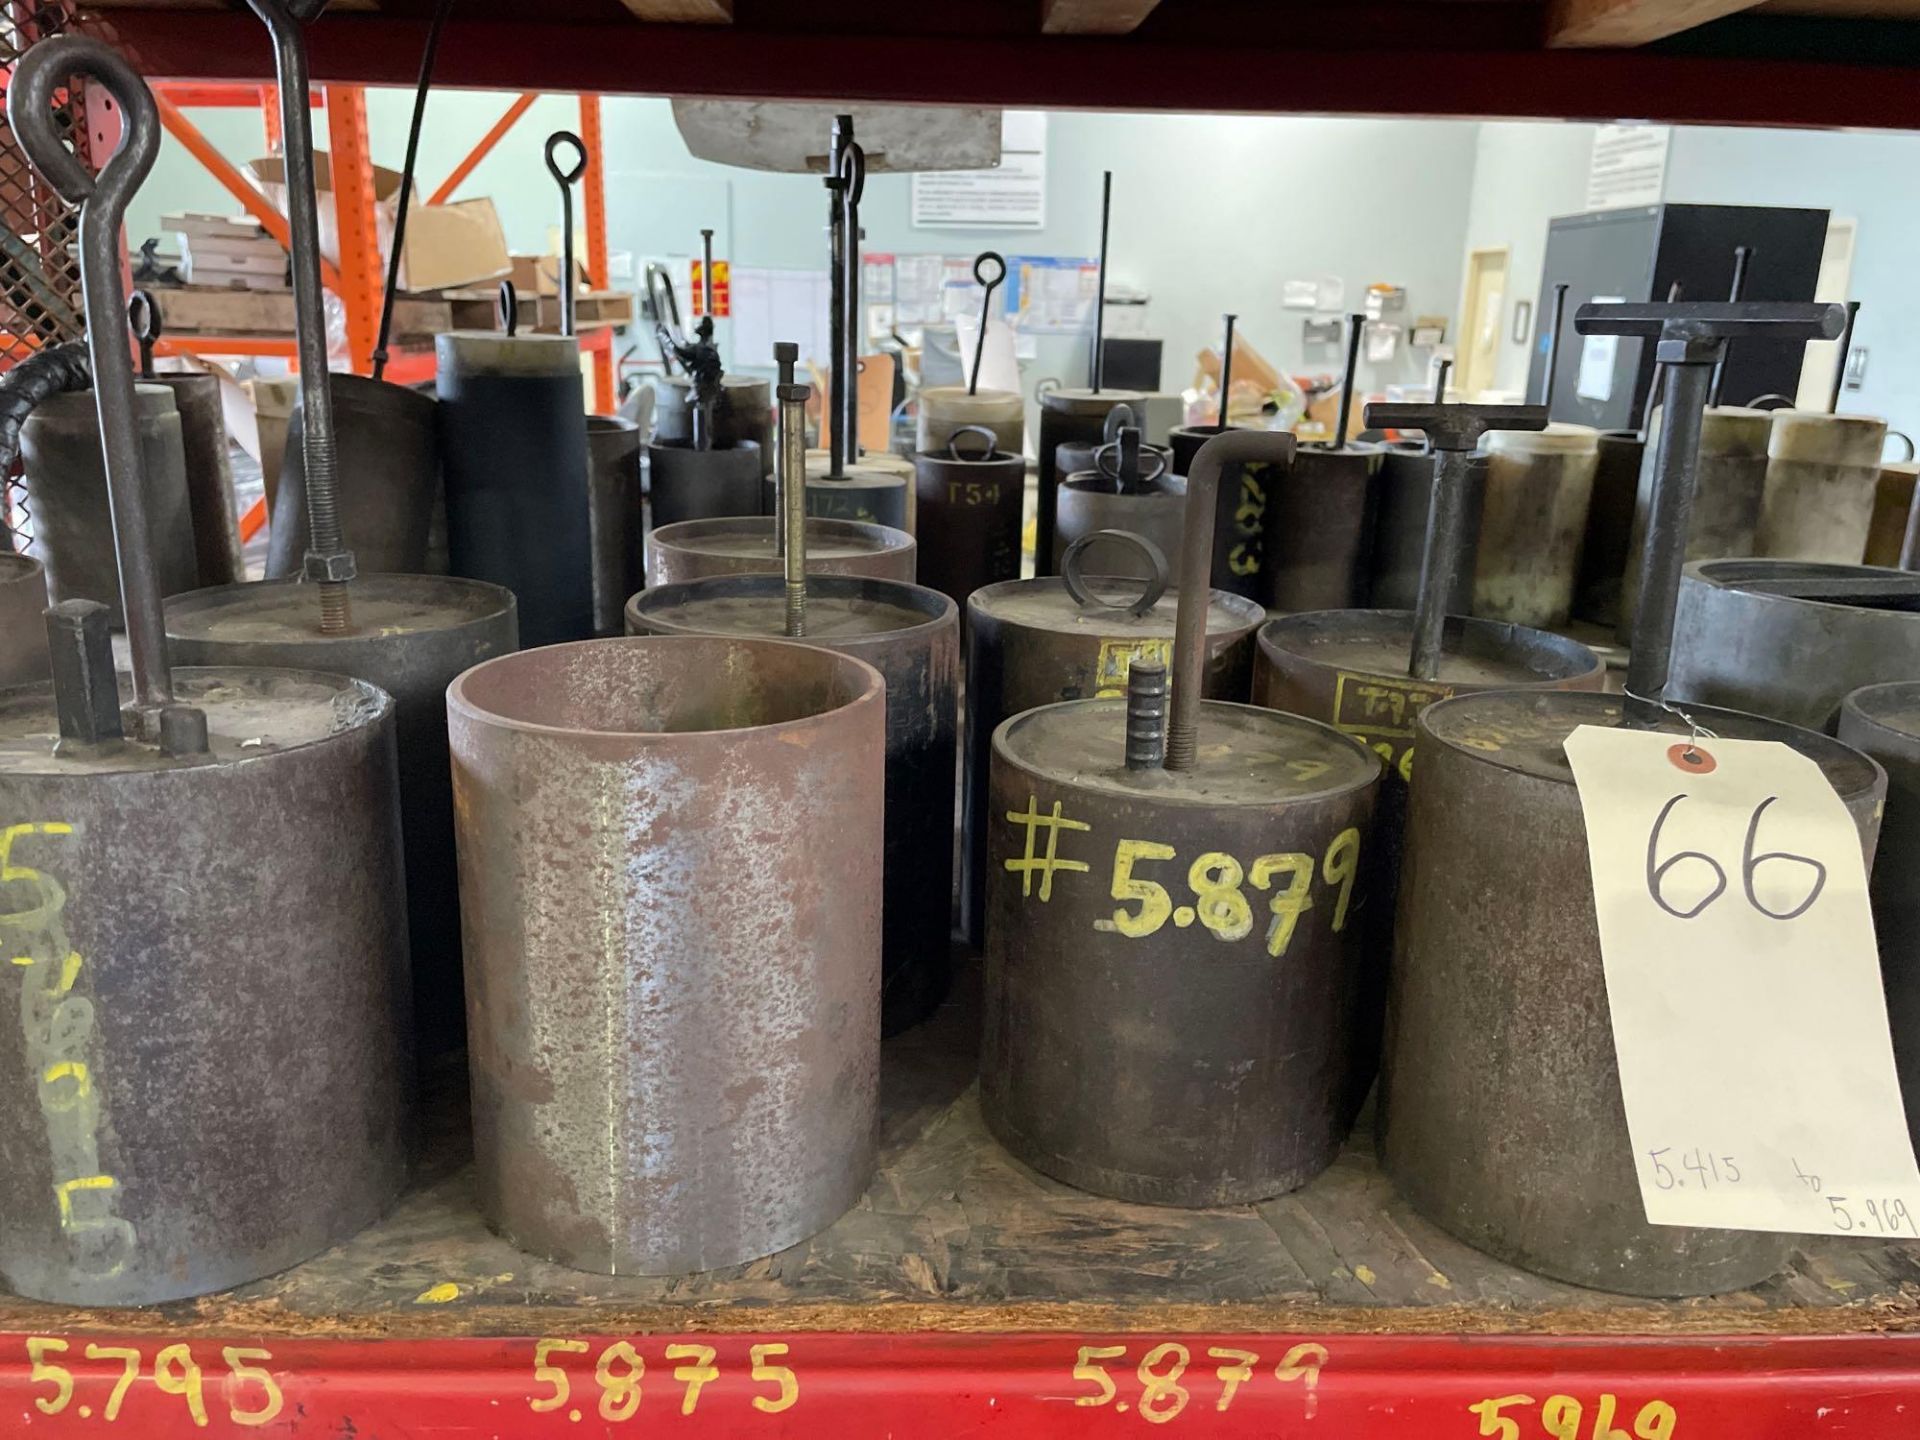 Lot of 15: Pipe Testing Drifts, Sizes from 5.415 to 5.969 - Image 4 of 7